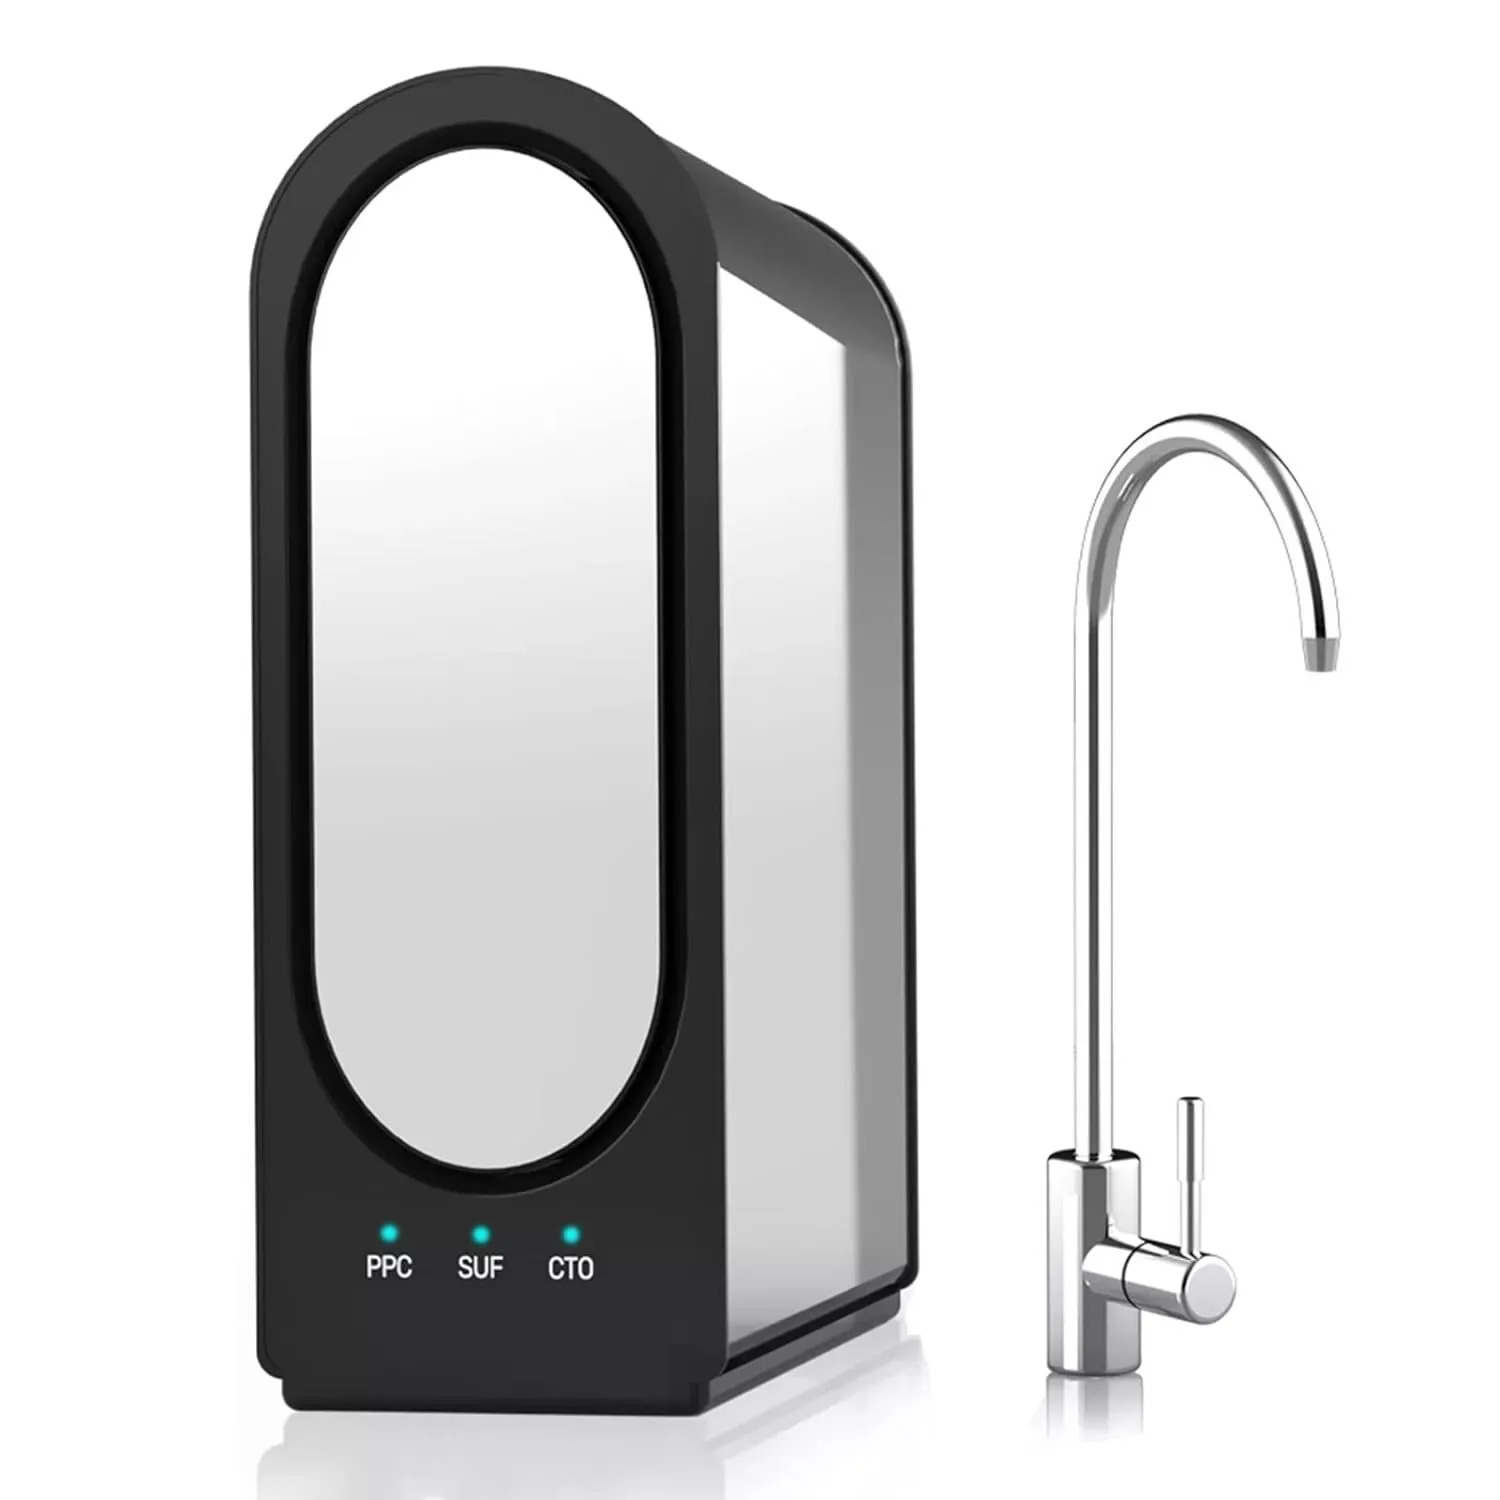 Ningbo Fortune Introduces Automatic Pre Water Filter for Effortless Clean Water